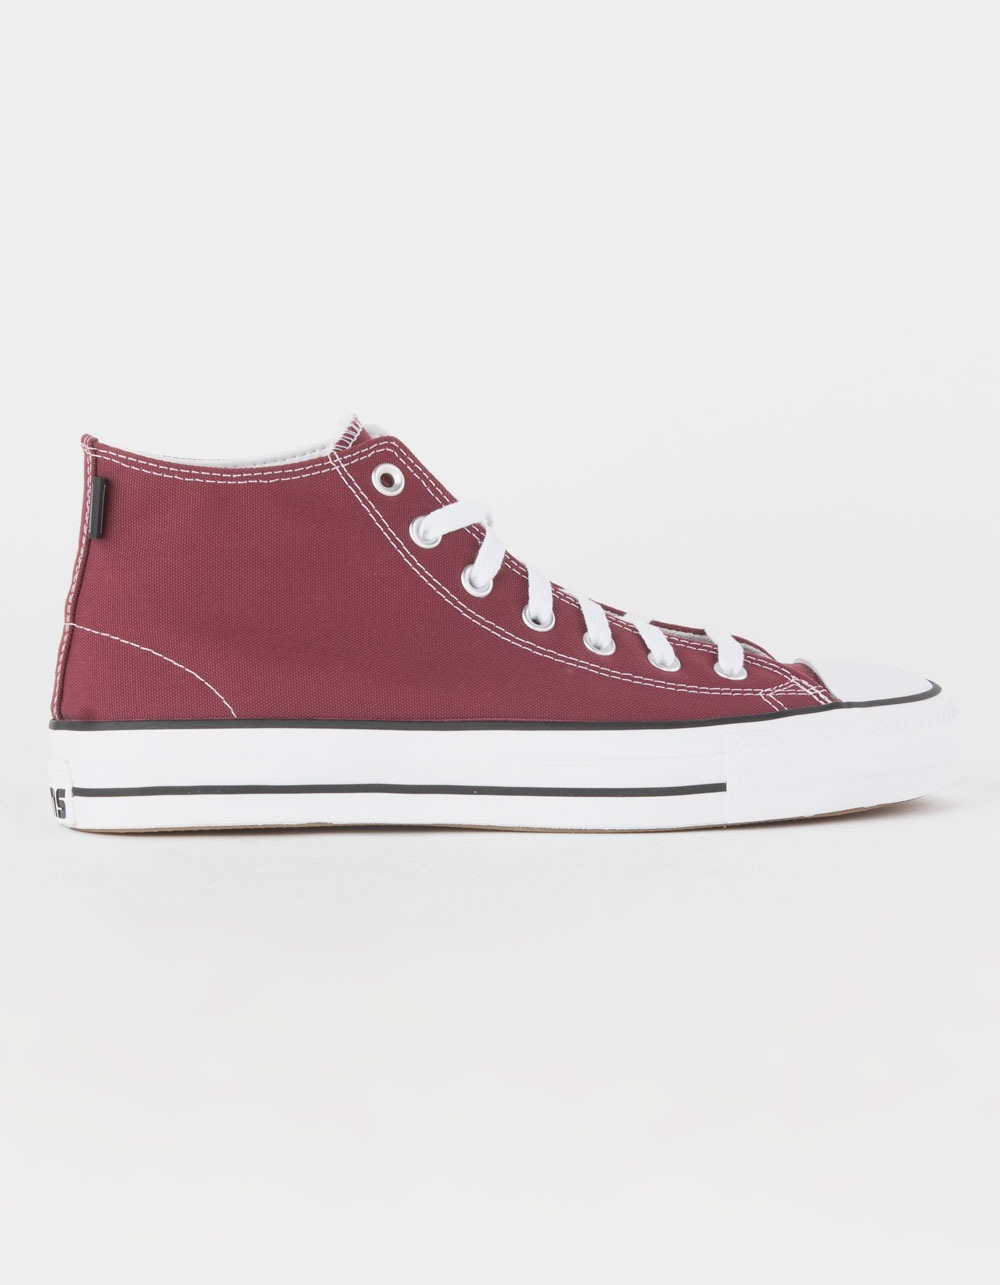 CONVERSE Chuck Taylor All Star Pro Mens Skate Shoes - CHERRY | Tillys